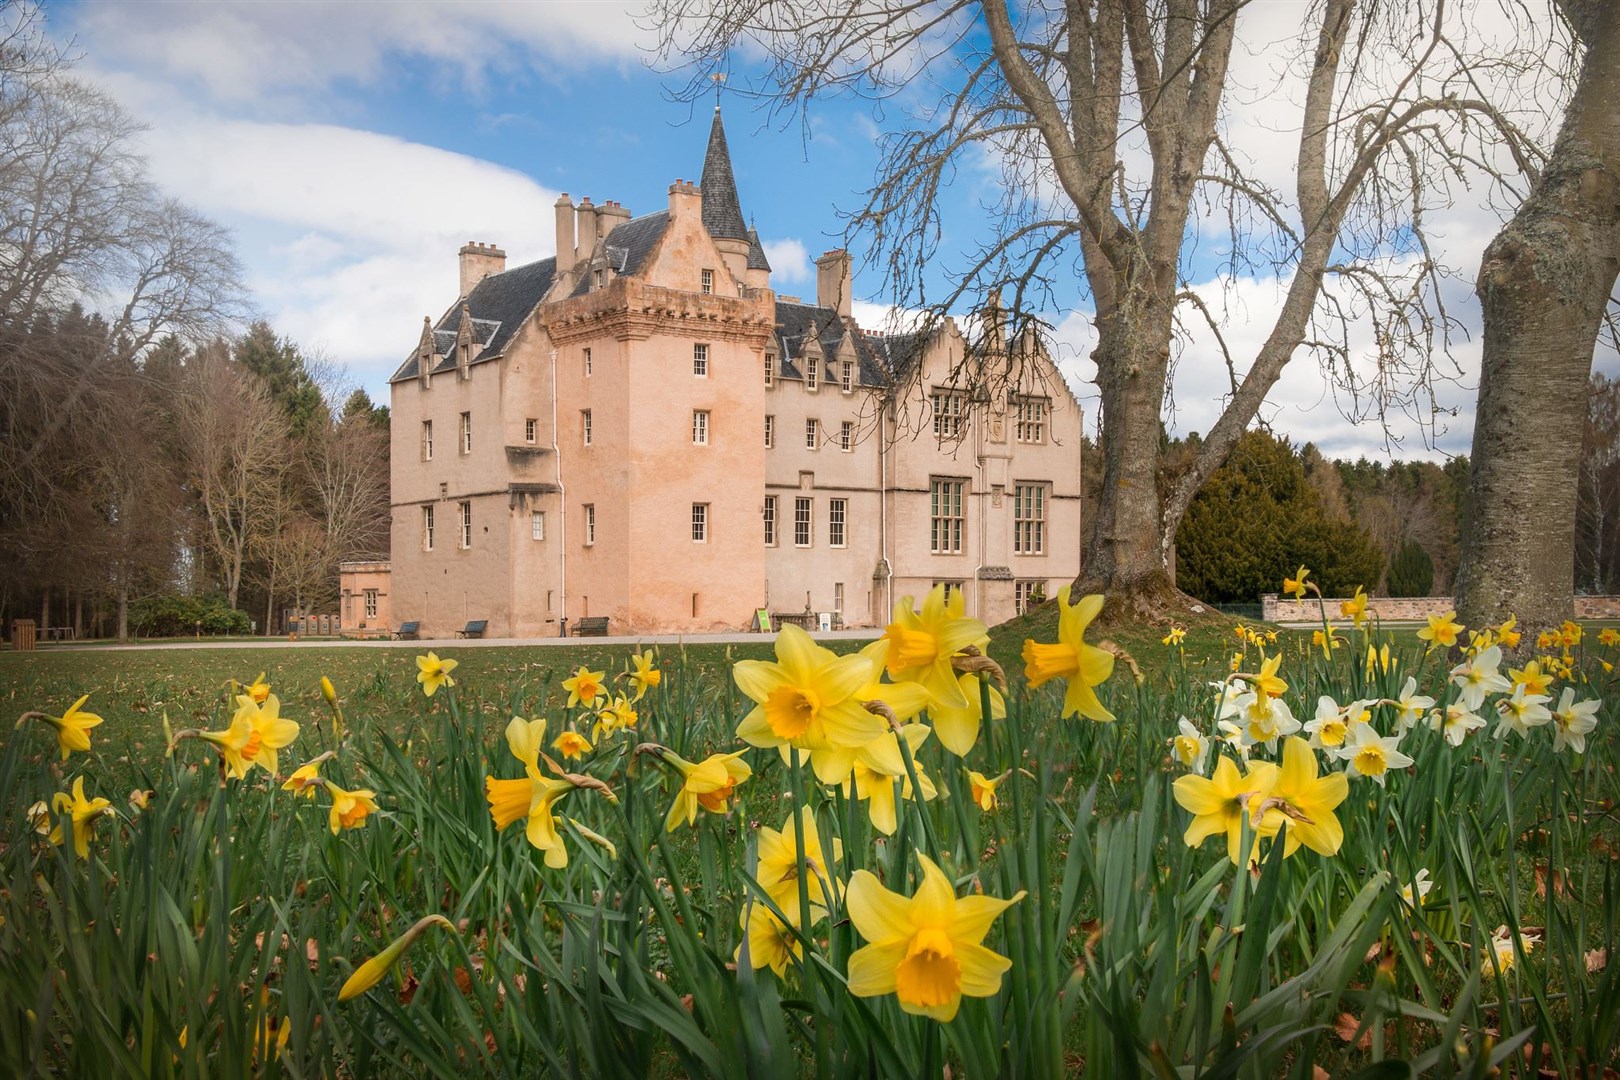 Brodie Castle grows a vast array of daffodils in the spring. Picture: NTS